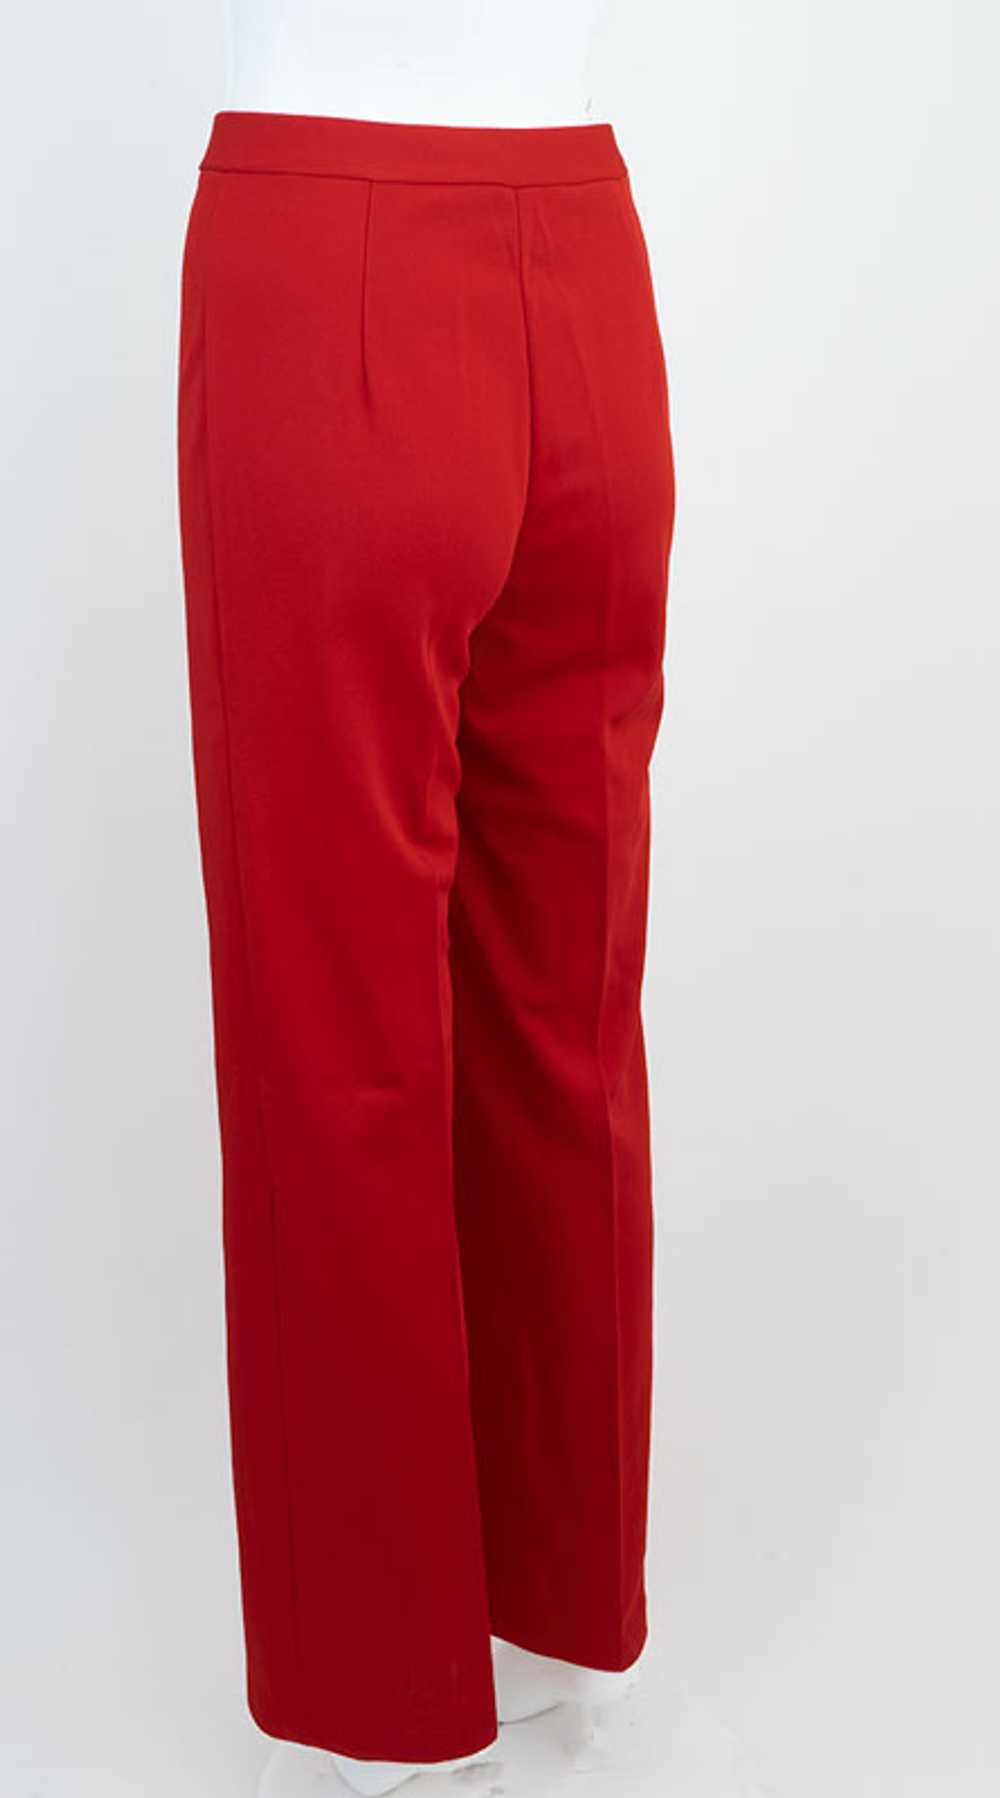 1970s Red Flared Pants - image 4